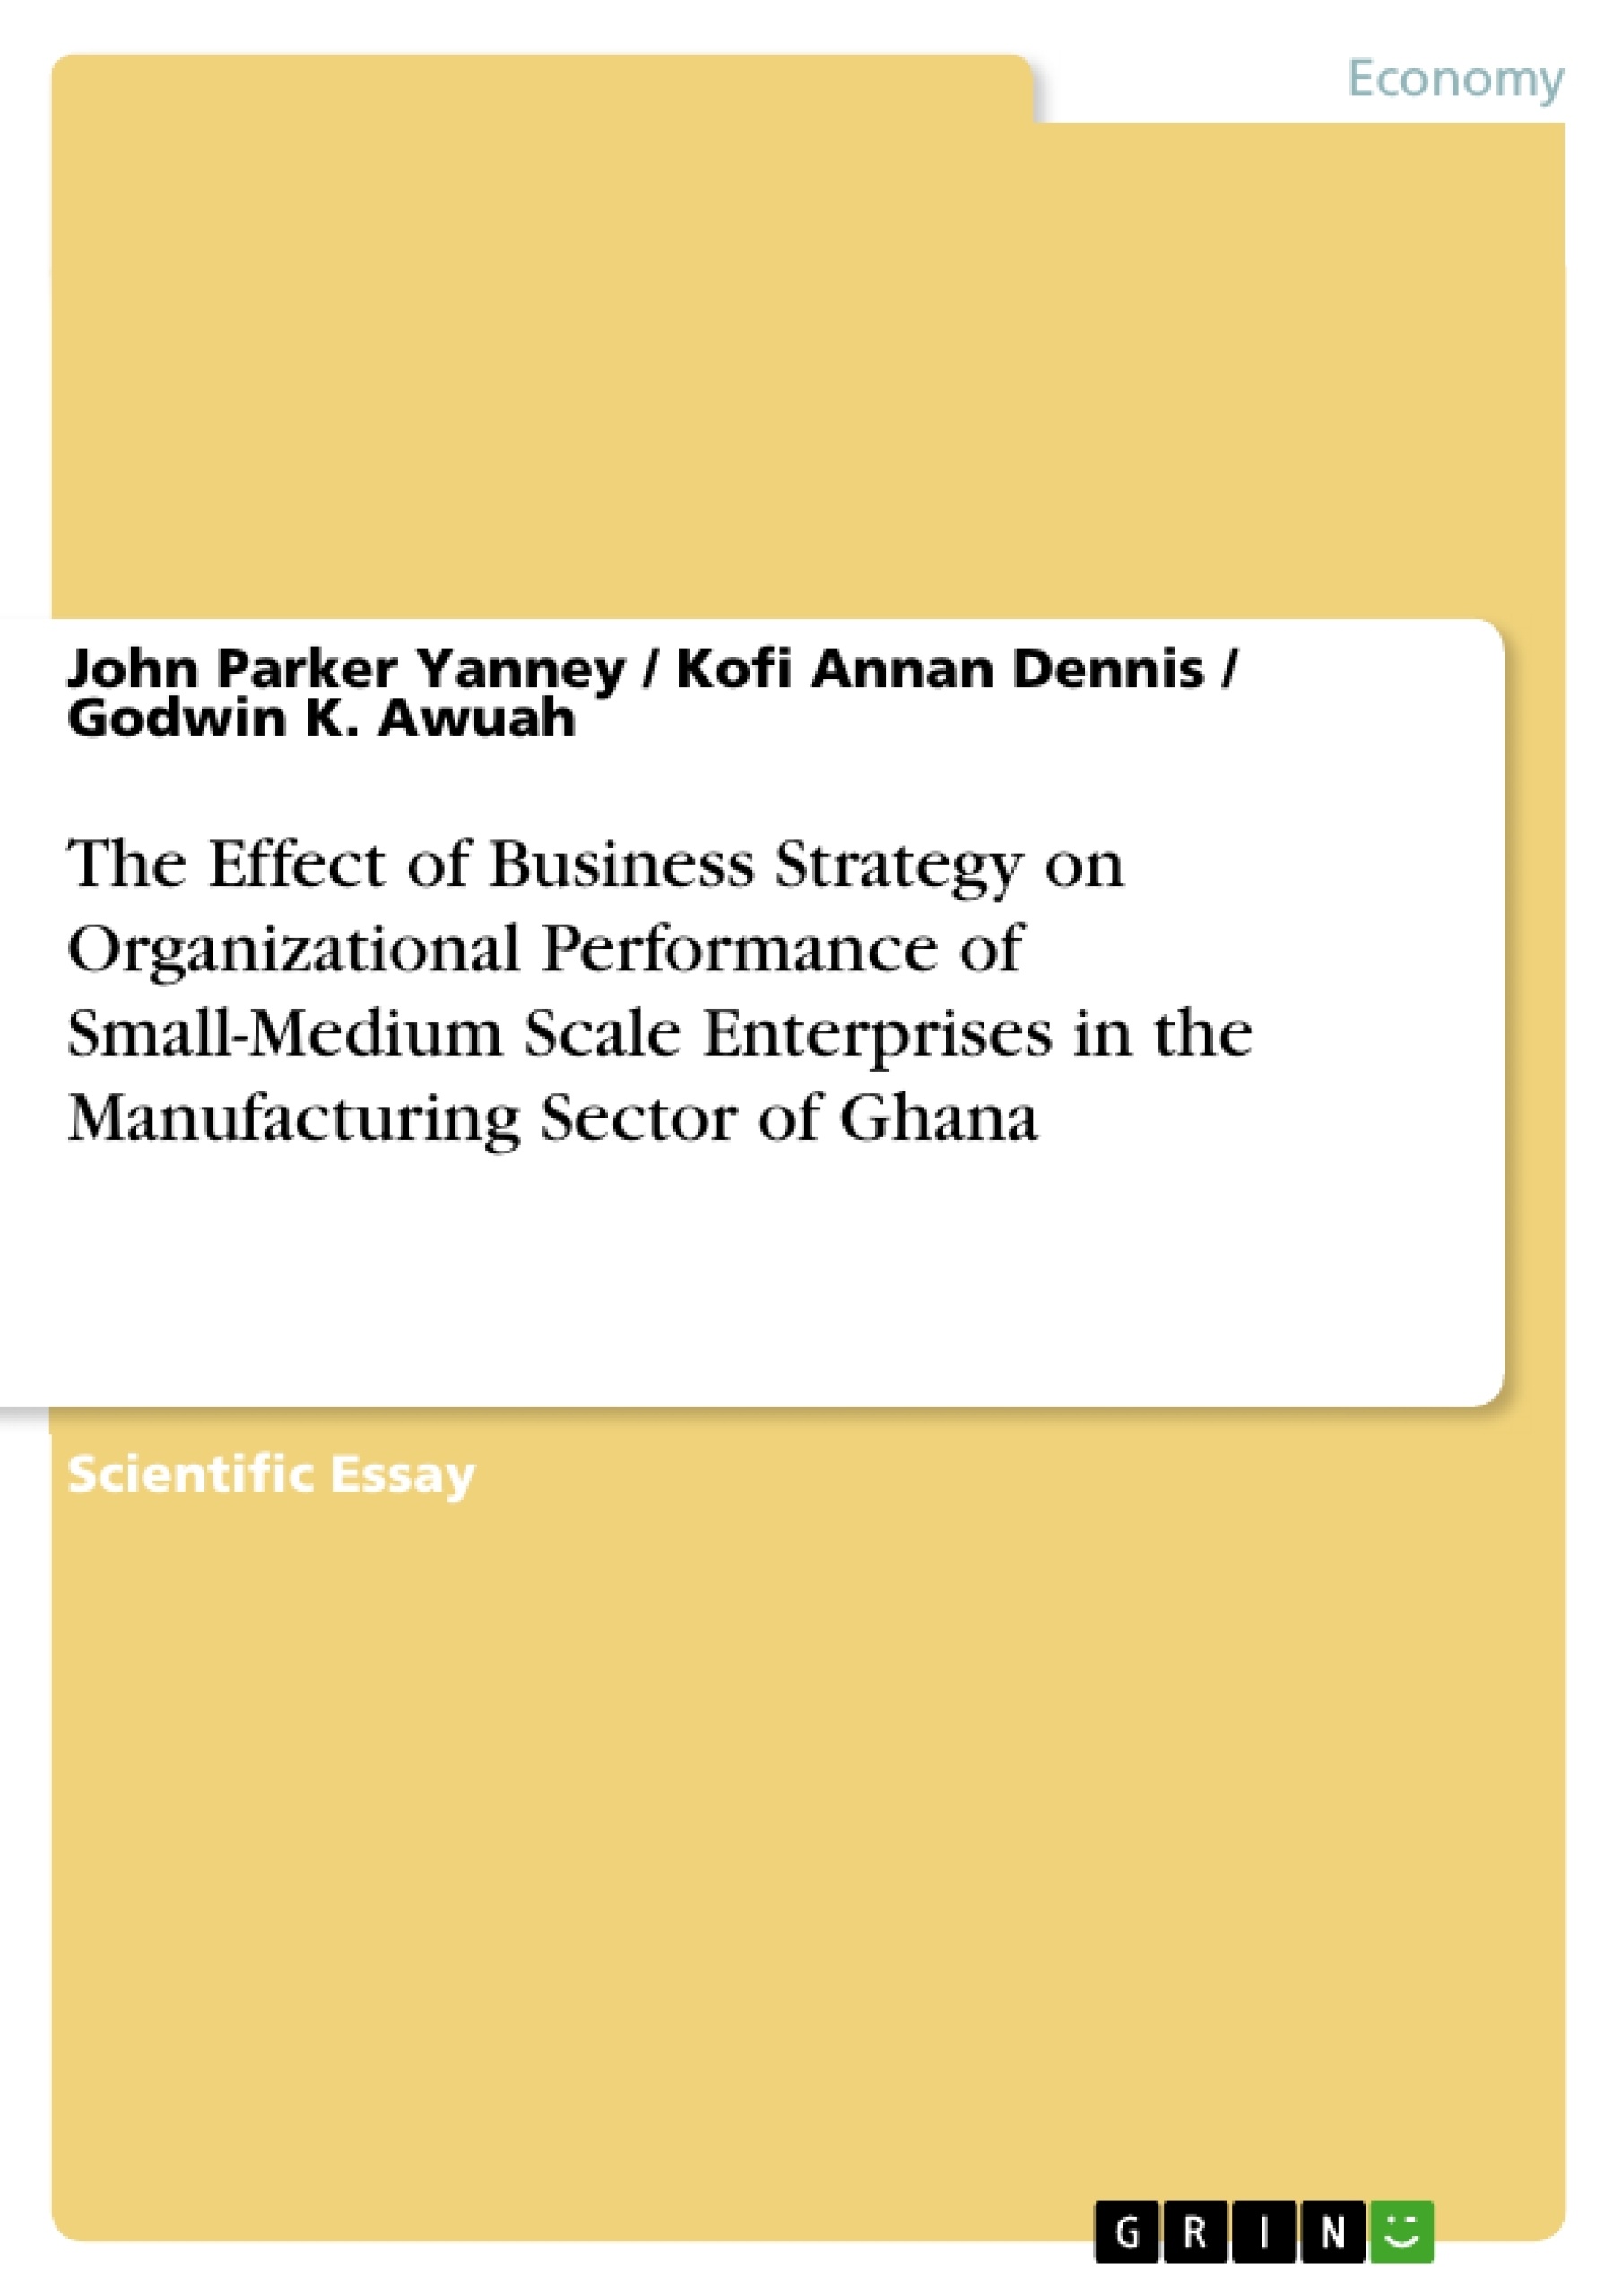 Title: The Effect of Business Strategy on Organizational Performance of Small-Medium Scale Enterprises in the Manufacturing Sector of Ghana